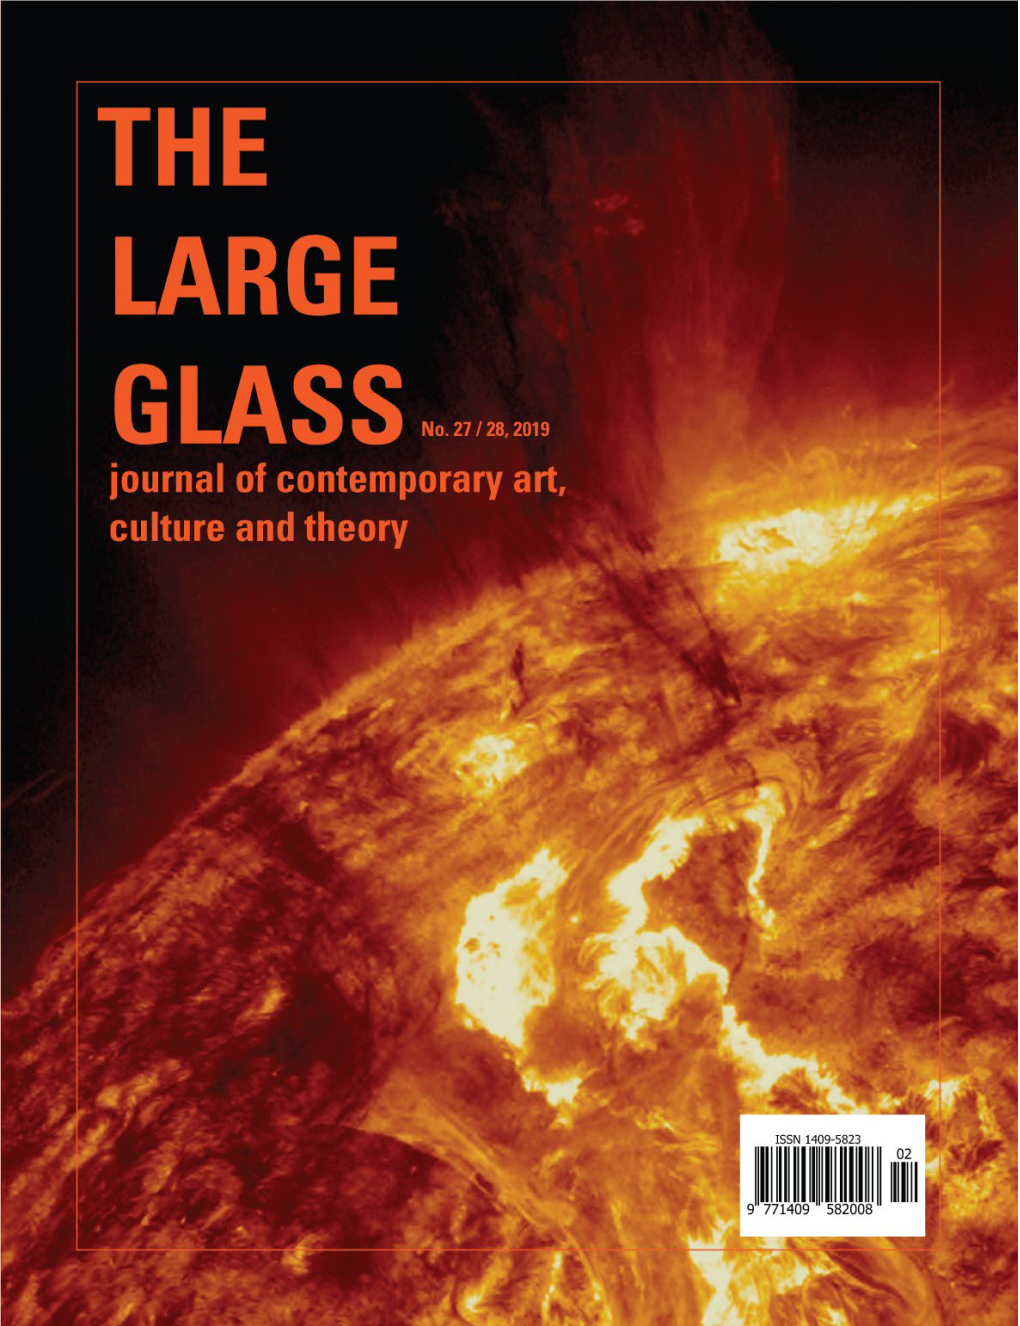 The Large Glass Presents a Range of Approaches